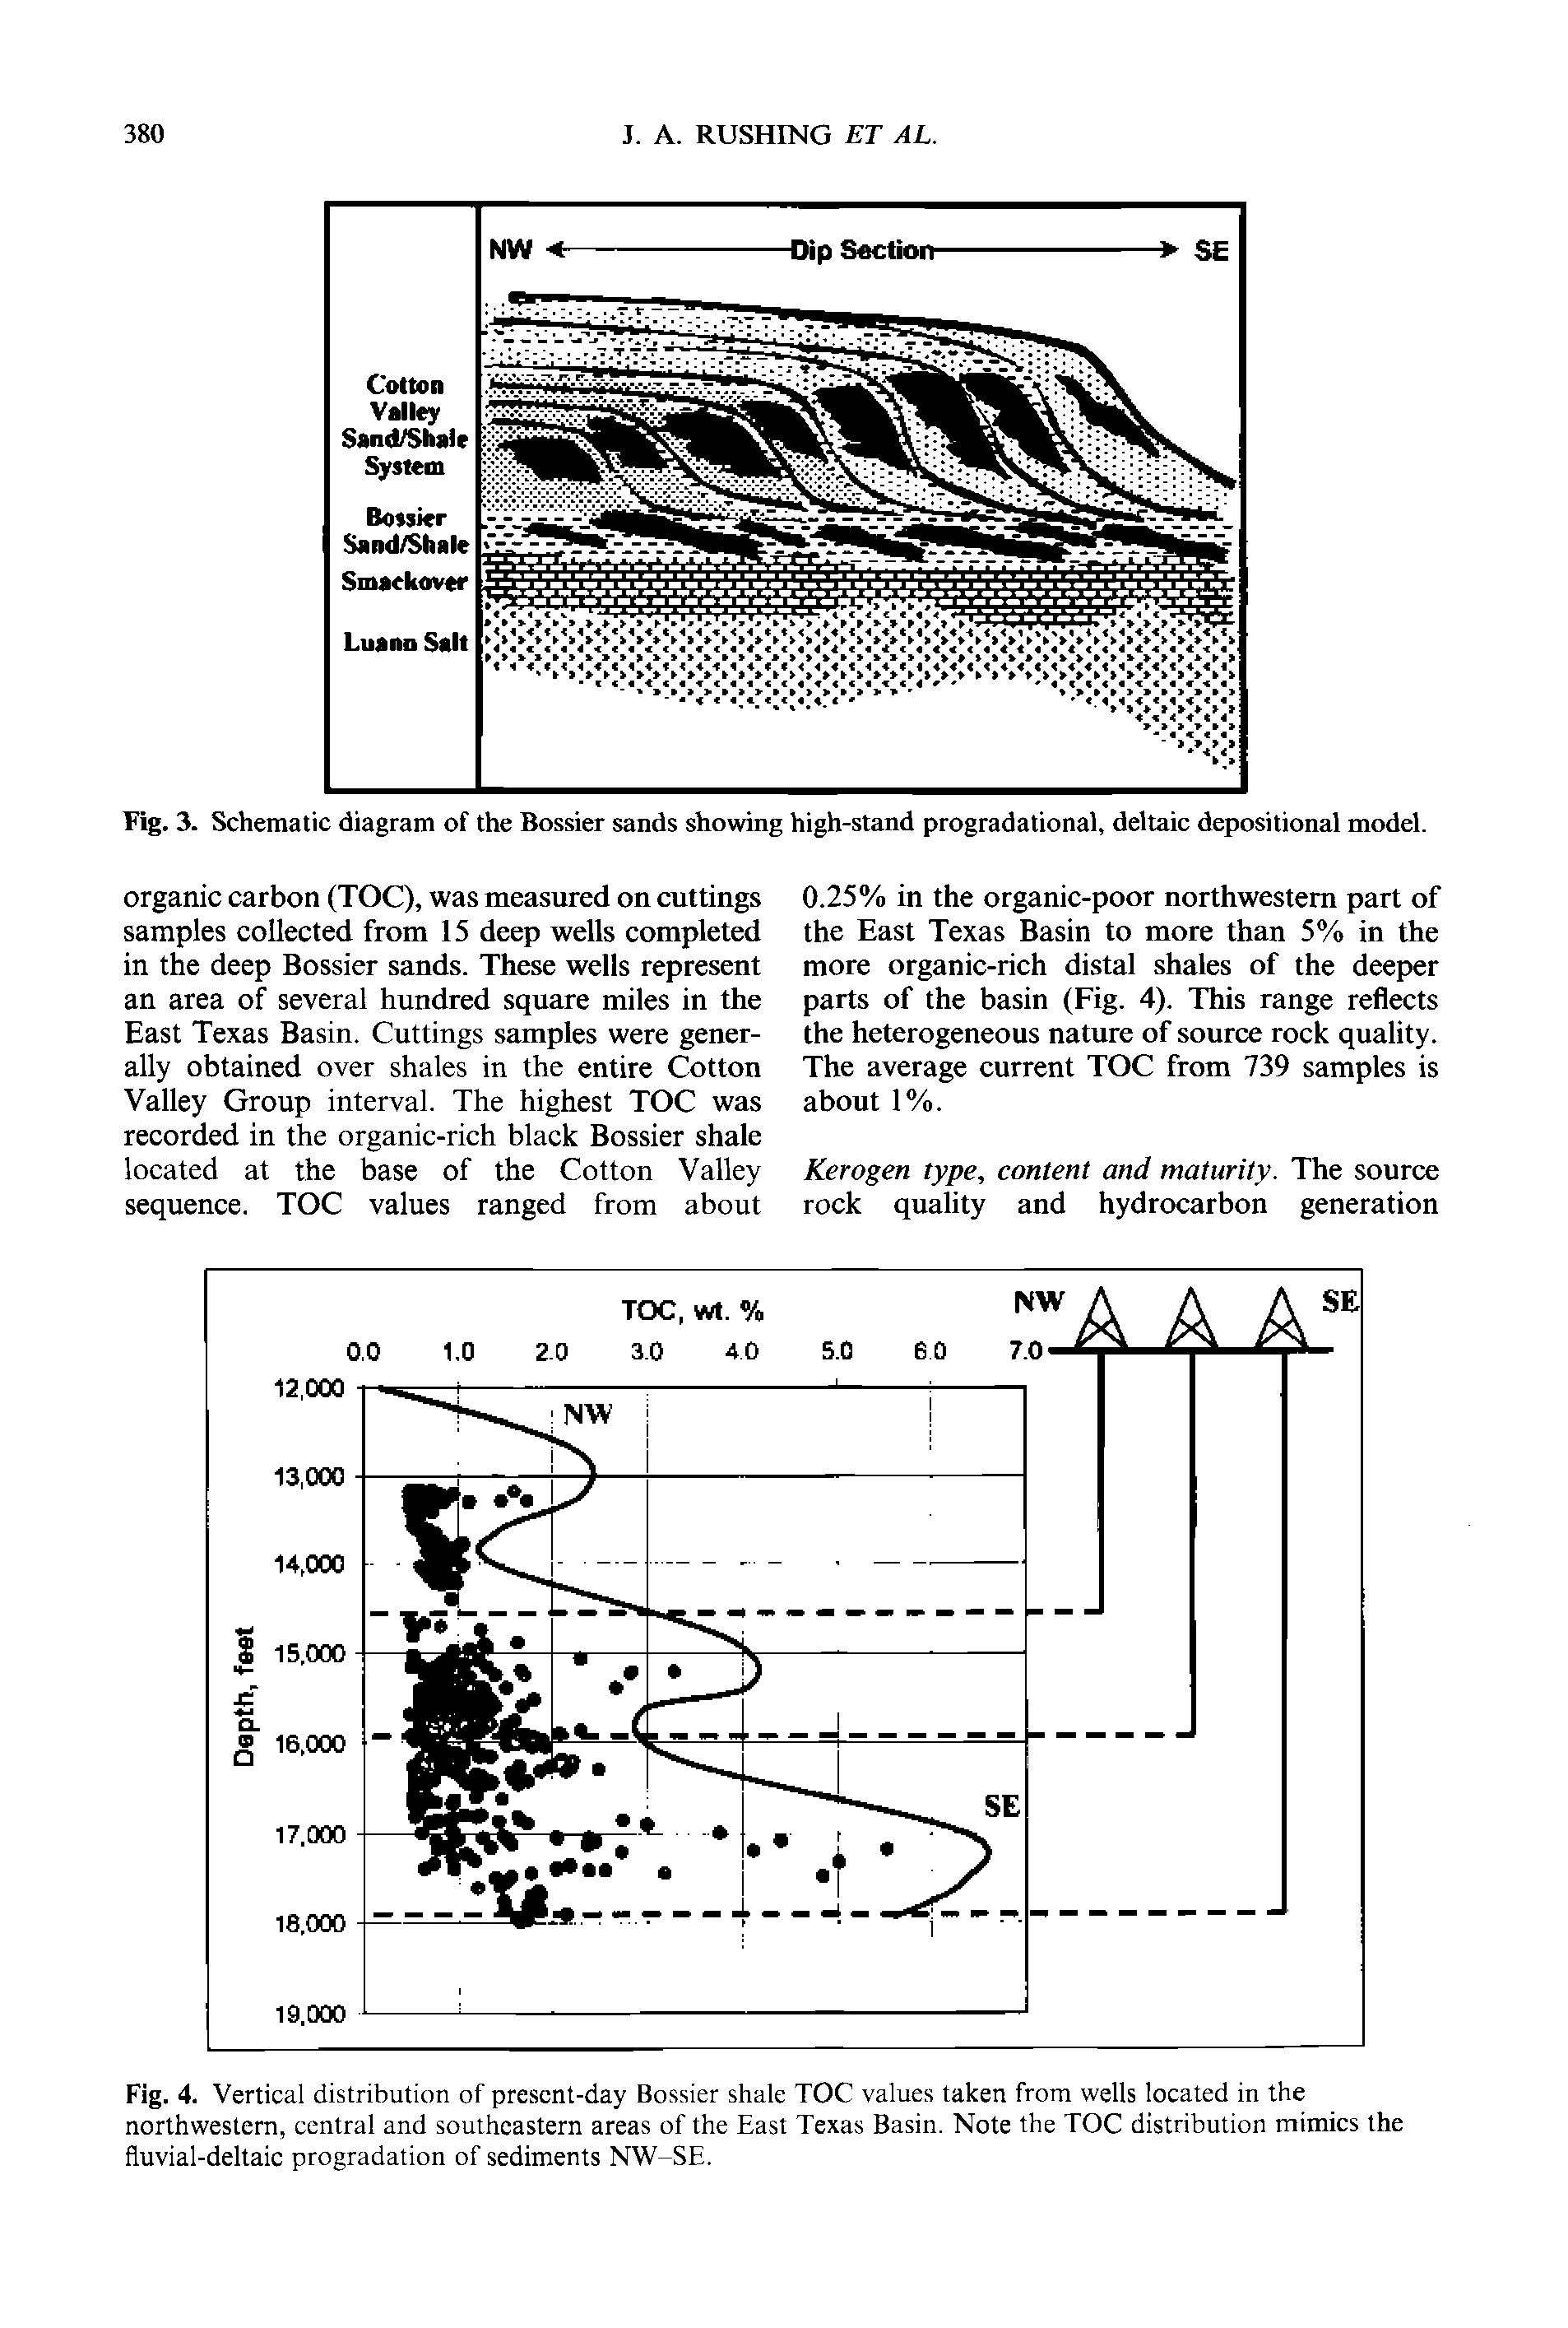 Fig. 3. Schematic diagram of the Bossier sands showing high-stand progradational, deltaic depositional model.